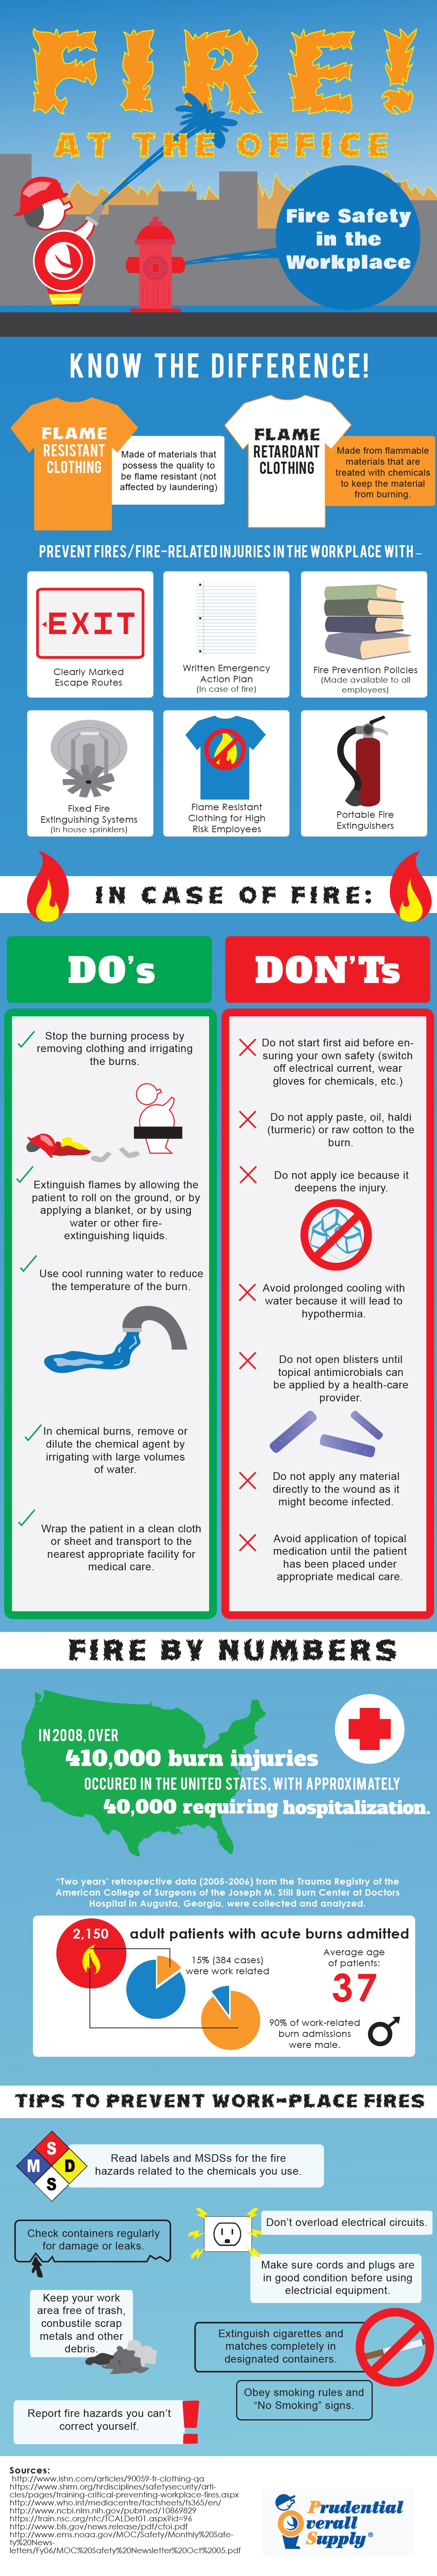 Fire Safety and Precautions in the Workplace